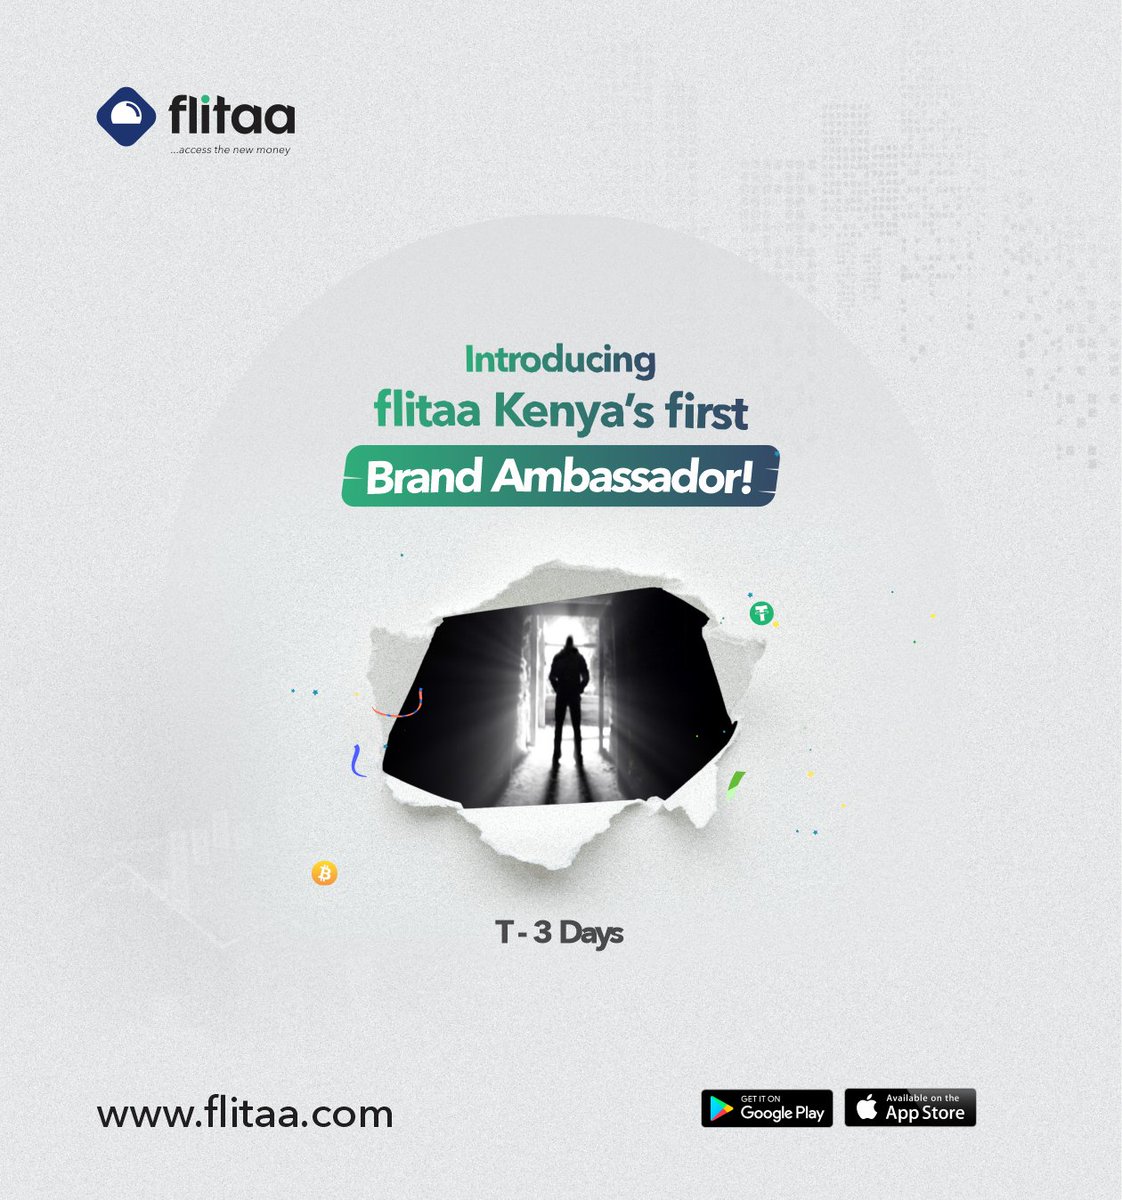 New week, great news! We have something B-I-G in-route 🥳. Have any guesses who our latest addition to the flitaa community could be? 🤔 #flitaaKe #AccessTheNewMoney #BrandAmbassador